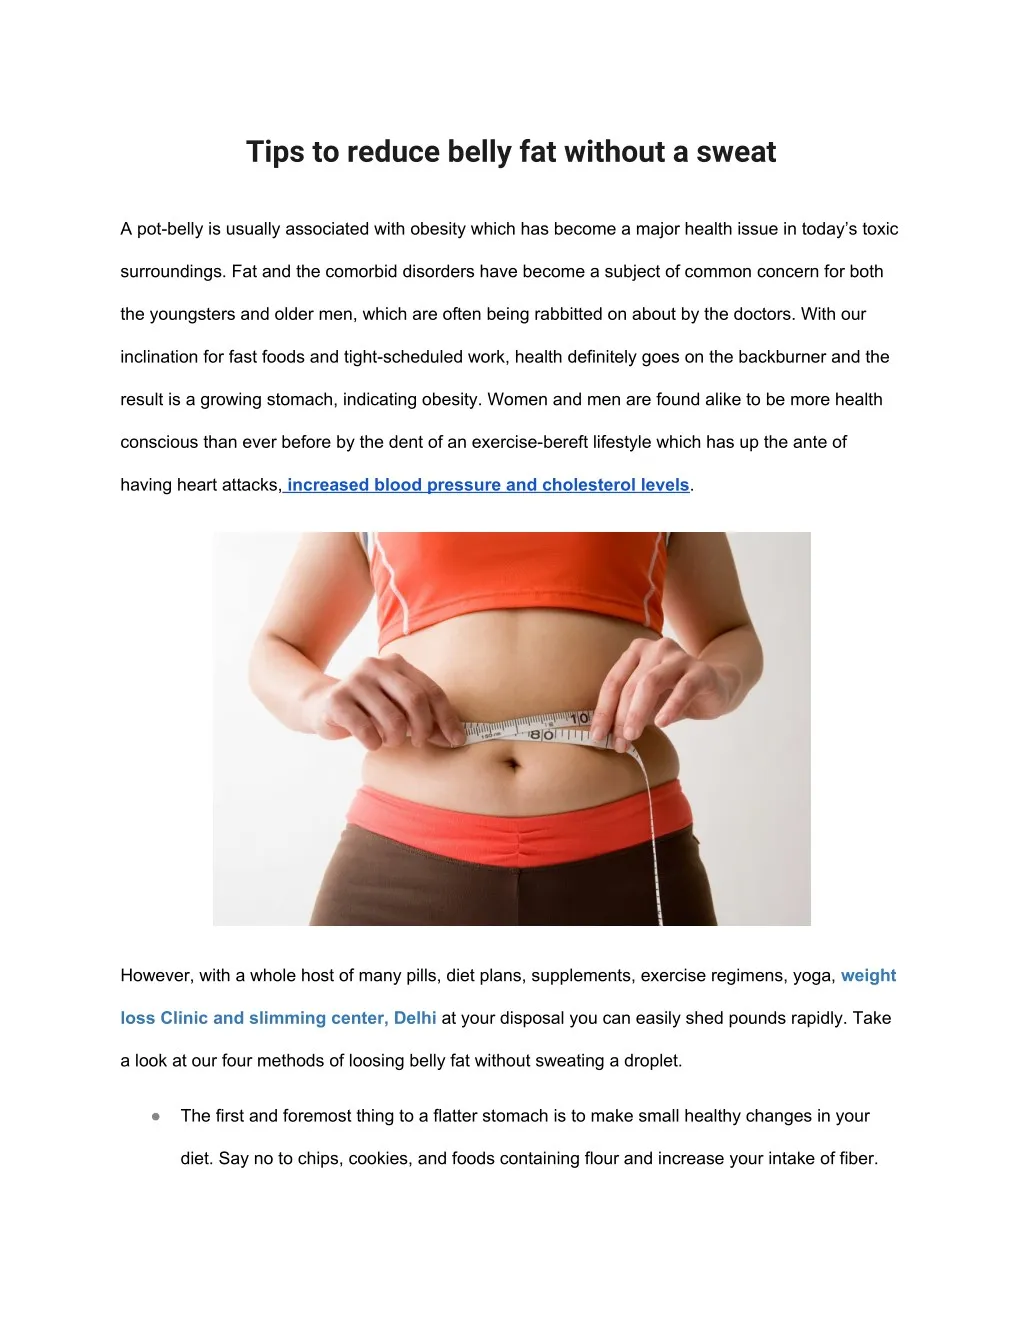 tips to reduce belly fat without a sweat